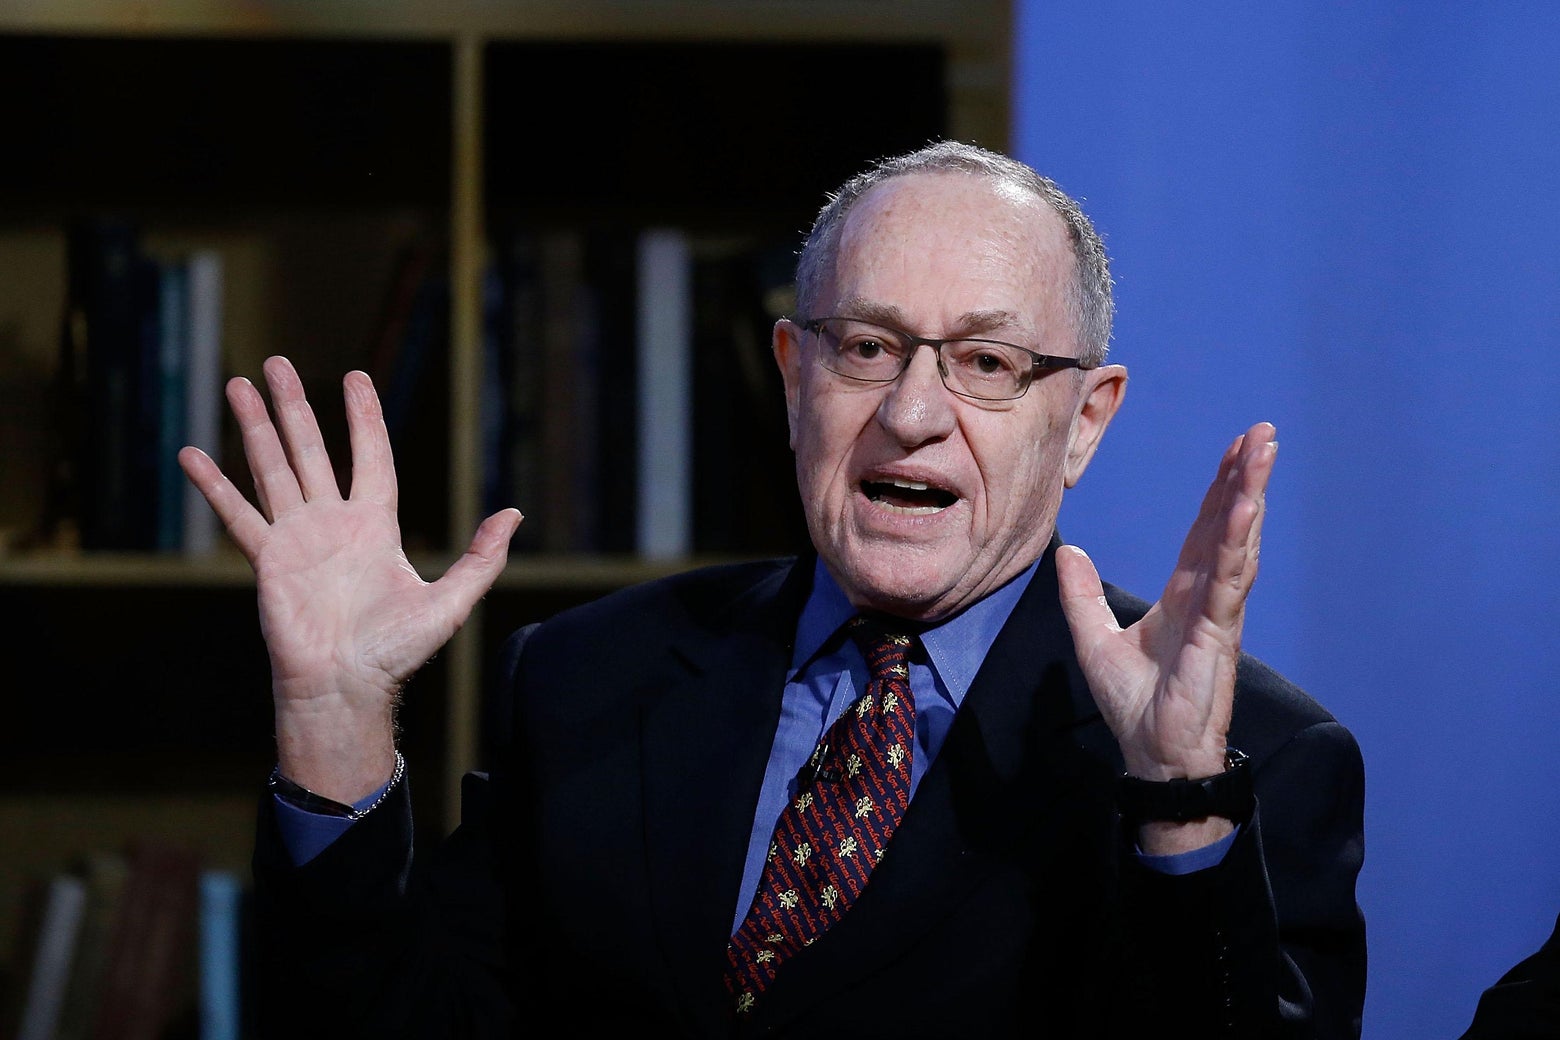 Alan Dershowitz—Fresh From Dinner With Trump—Says the President’s Civil Liberties Are Being Violated